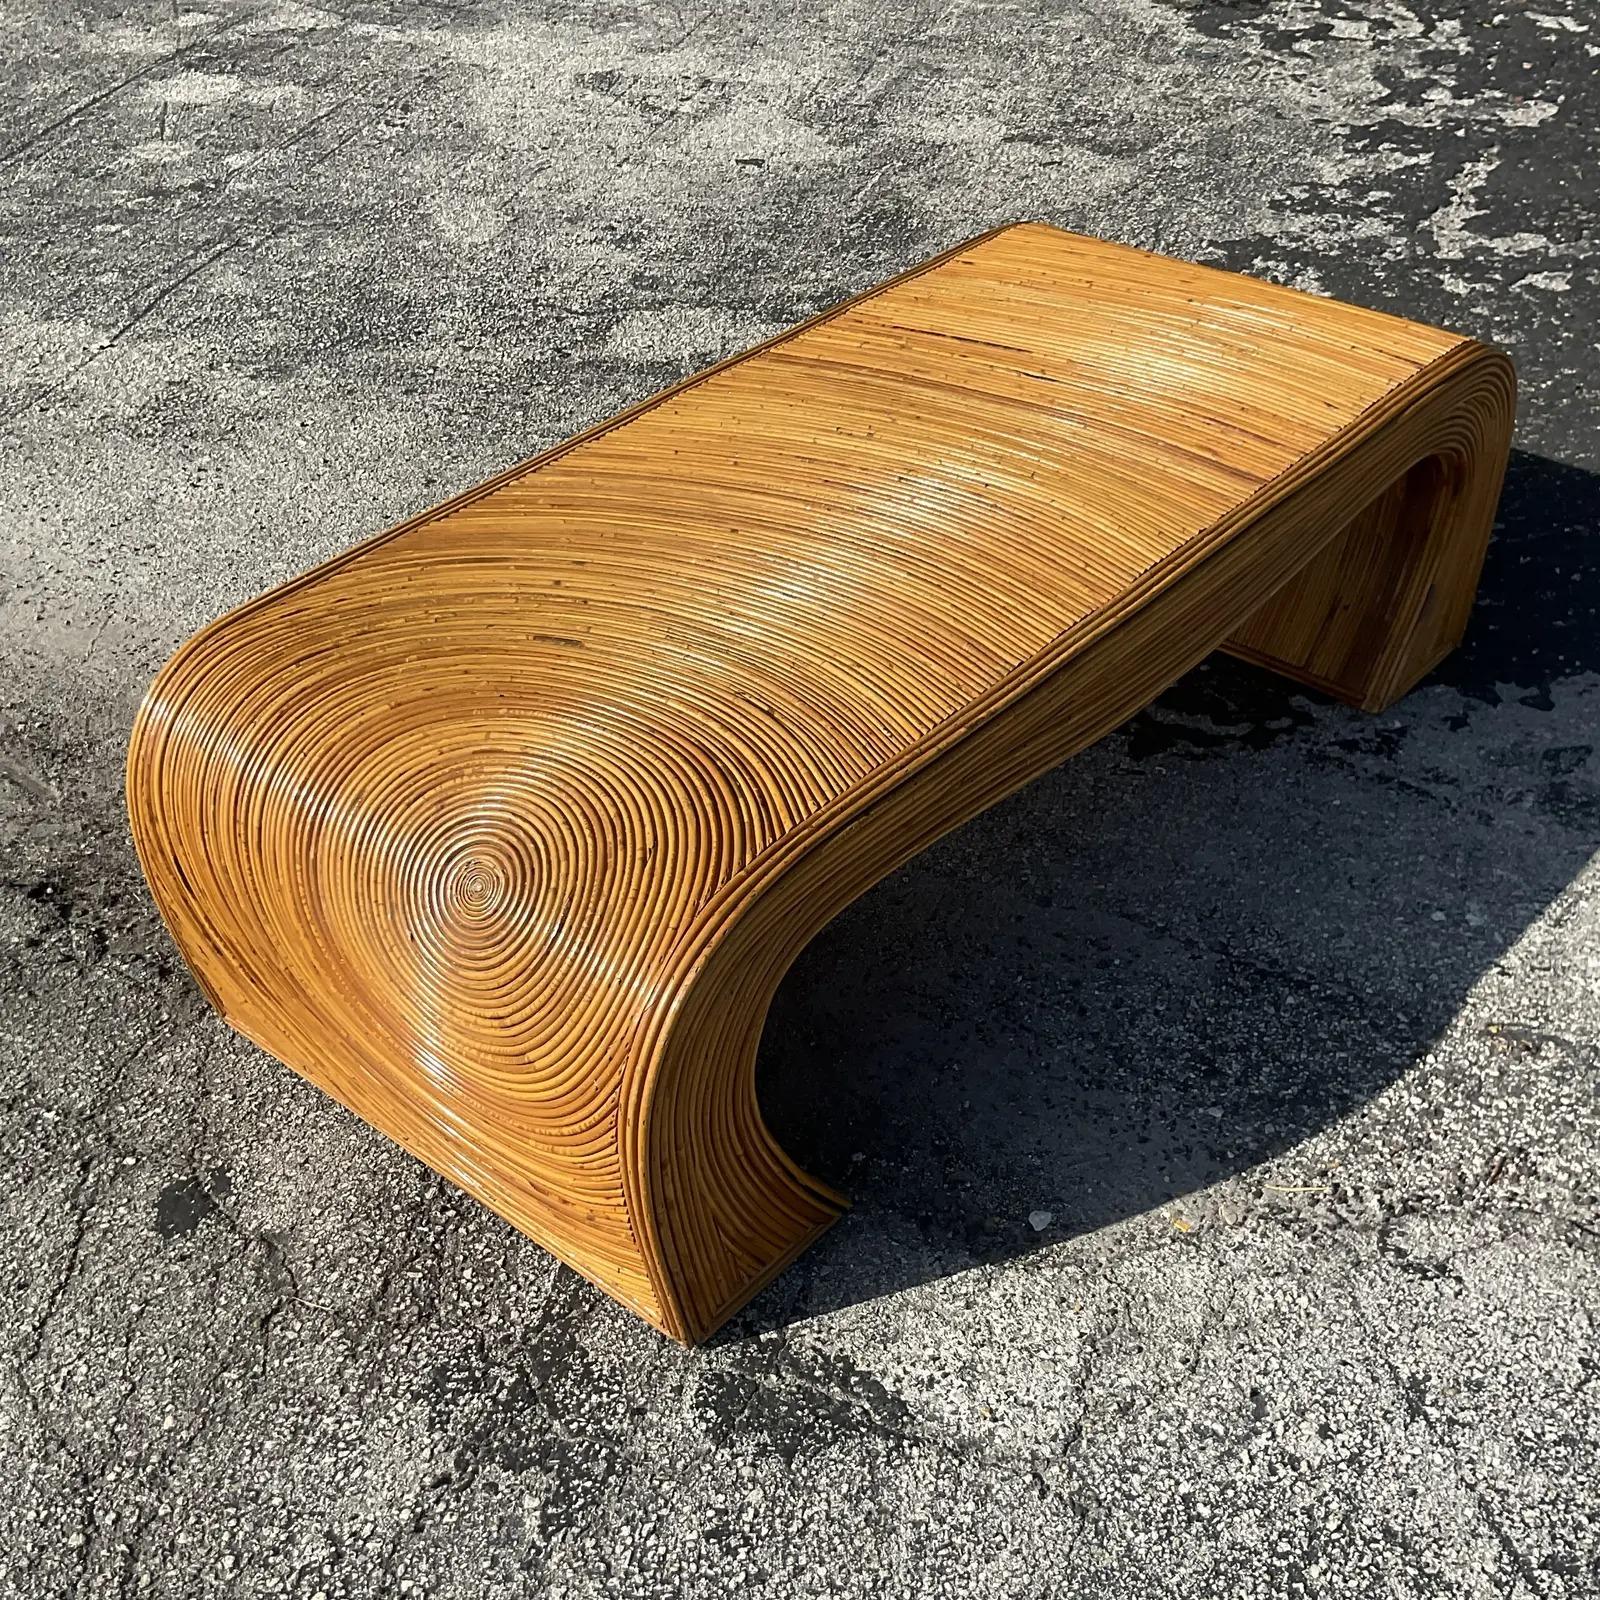 Vintage coastal waterfall coffee table. Beautiful pencil reed construction with the coveted Sunburst design. Done in the manner of Gabriella Crespi. Acquired from a Palm Beach estate.